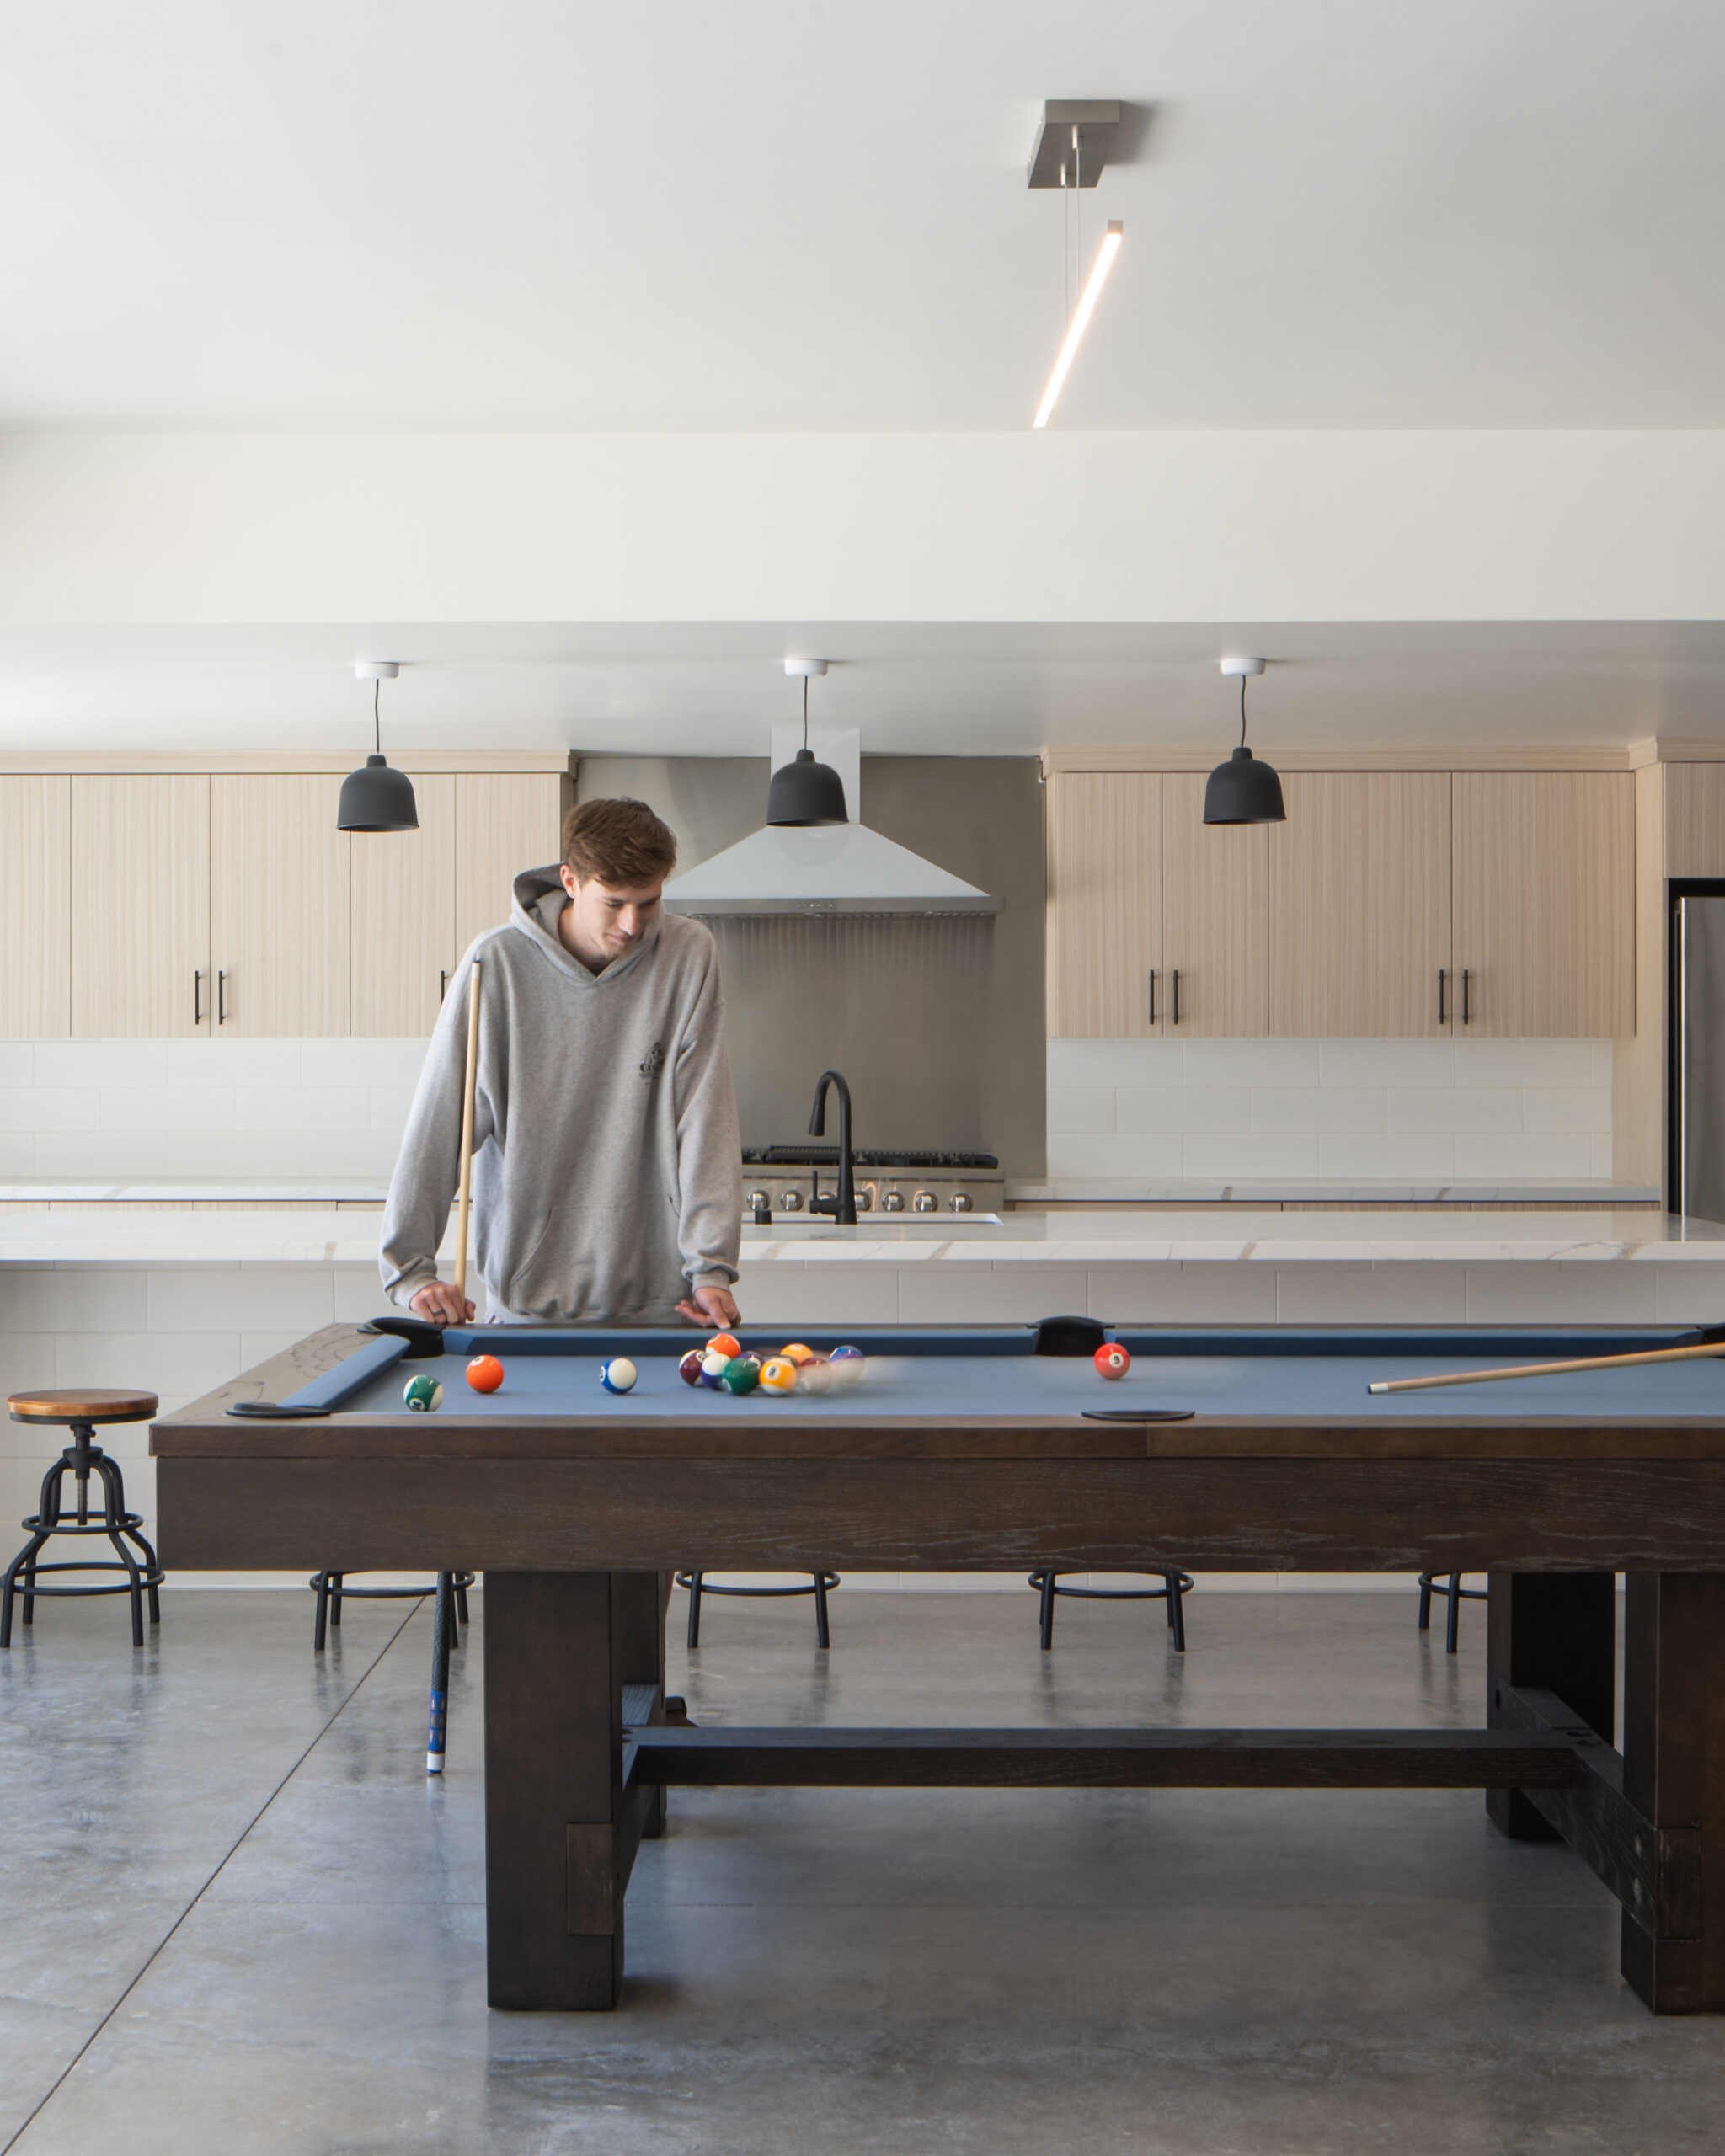 Interior architectural photograph of the common kitchen area from Elements Apartments in Santa Maria, California. Includes models playing a game of pool